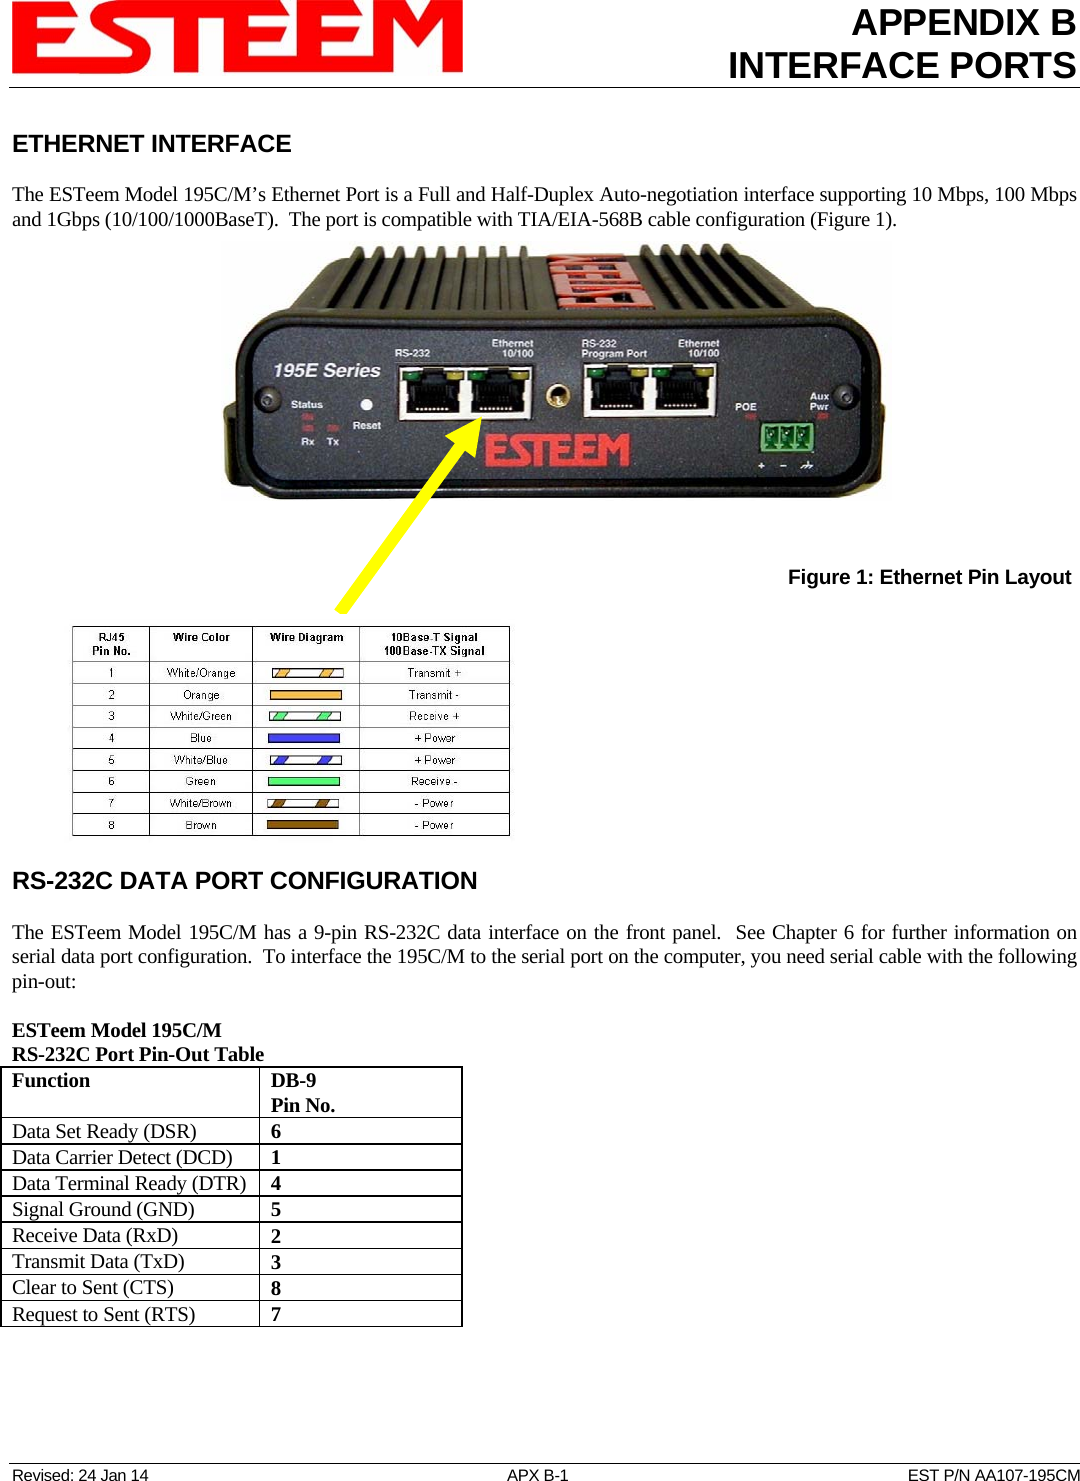 APPENDIX B INTERFACE PORTS   Revised: 24 Jan 14  APX B-1  EST P/N AA107-195CM ETHERNET INTERFACE  The ESTeem Model 195C/M’s Ethernet Port is a Full and Half-Duplex Auto-negotiation interface supporting 10 Mbps, 100 Mbps and 1Gbps (10/100/1000BaseT).  The port is compatible with TIA/EIA-568B cable configuration (Figure 1).              Figure 1: Ethernet Pin Layout RS-232C DATA PORT CONFIGURATION  The ESTeem Model 195C/M has a 9-pin RS-232C data interface on the front panel.  See Chapter 6 for further information on serial data port configuration.  To interface the 195C/M to the serial port on the computer, you need serial cable with the following pin-out:  ESTeem Model 195C/M RS-232C Port Pin-Out Table Function  DB-9 Pin No. Data Set Ready (DSR)  6 Data Carrier Detect (DCD)  1 Data Terminal Ready (DTR)  4 Signal Ground (GND)  5 Receive Data (RxD)  2 Transmit Data (TxD)  3 Clear to Sent (CTS)  8 Request to Sent (RTS)  7  